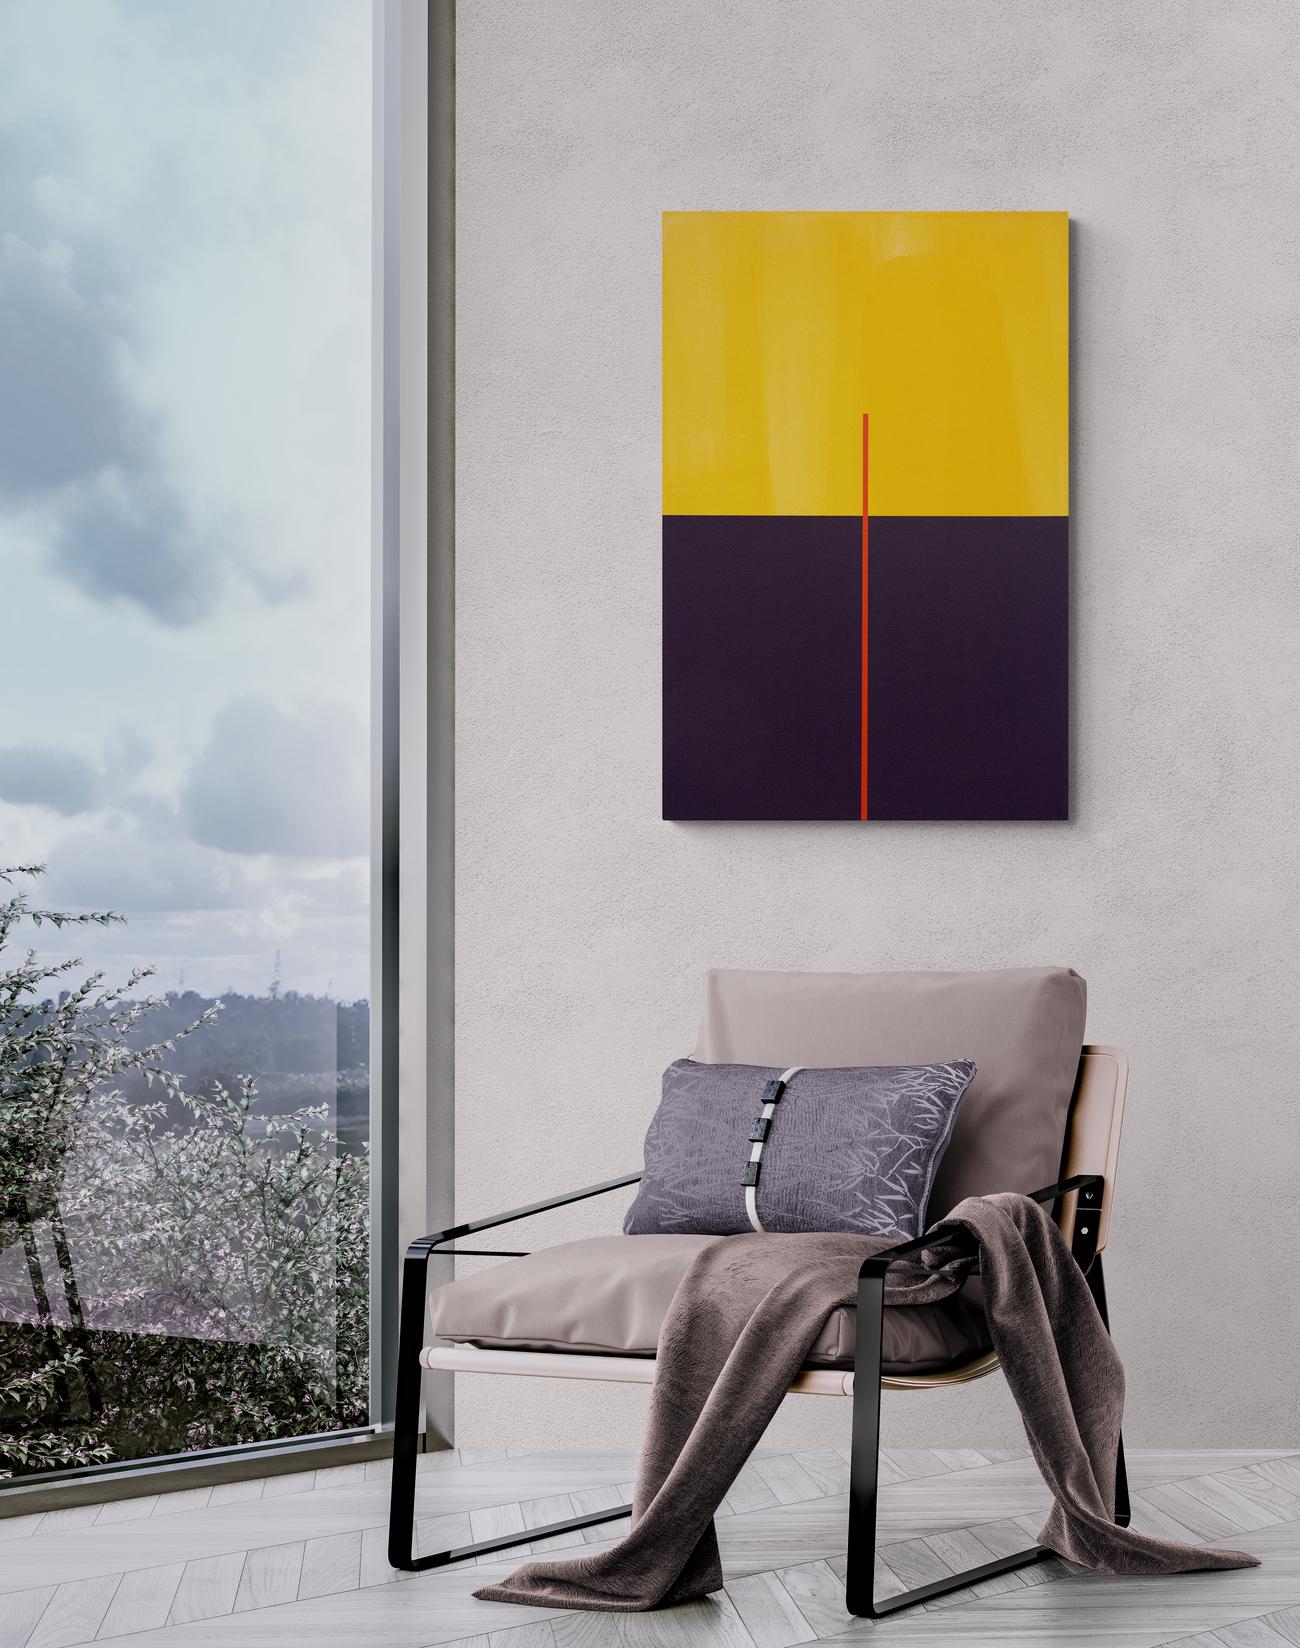 A bold eggplant shade of purple meets a field of amber yellow in this playful acrylic by Milly Ristvedt. A thin linear oblong of red pierces the center, anchoring the geometric painting suggesting an abstract landscape.

Milly Ristvedt (b. 1942,